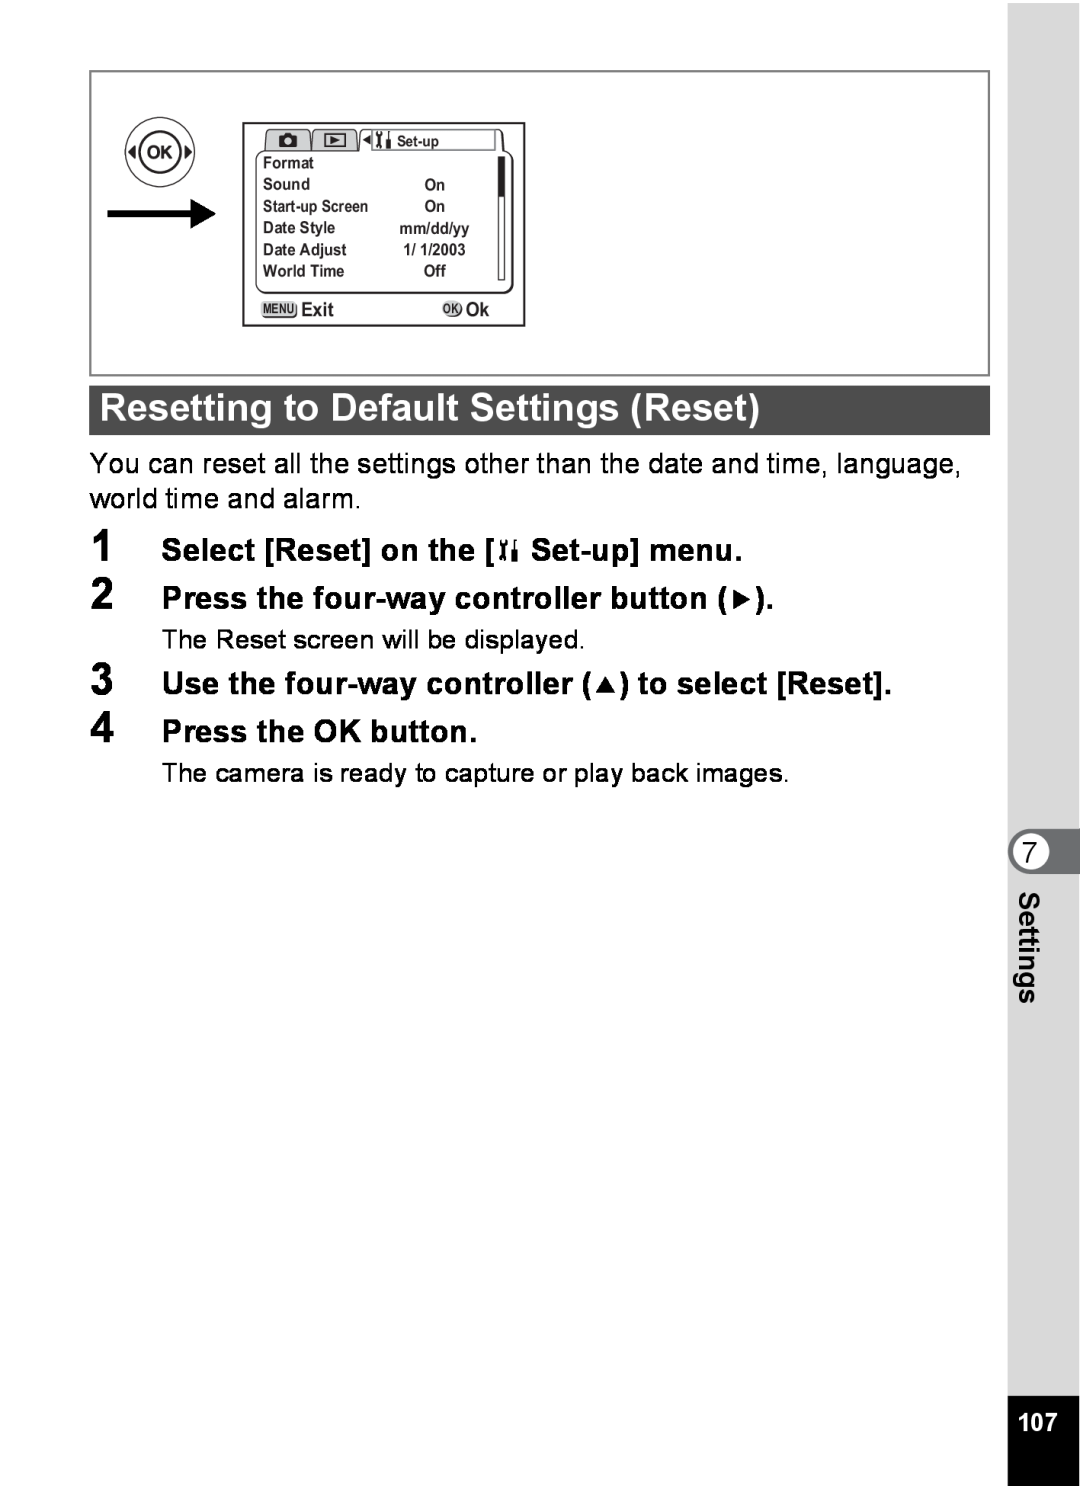 Pentax S4 manual Resetting to Default Settings Reset, Use the four-way controller 2 to select Reset. Press the OK button 